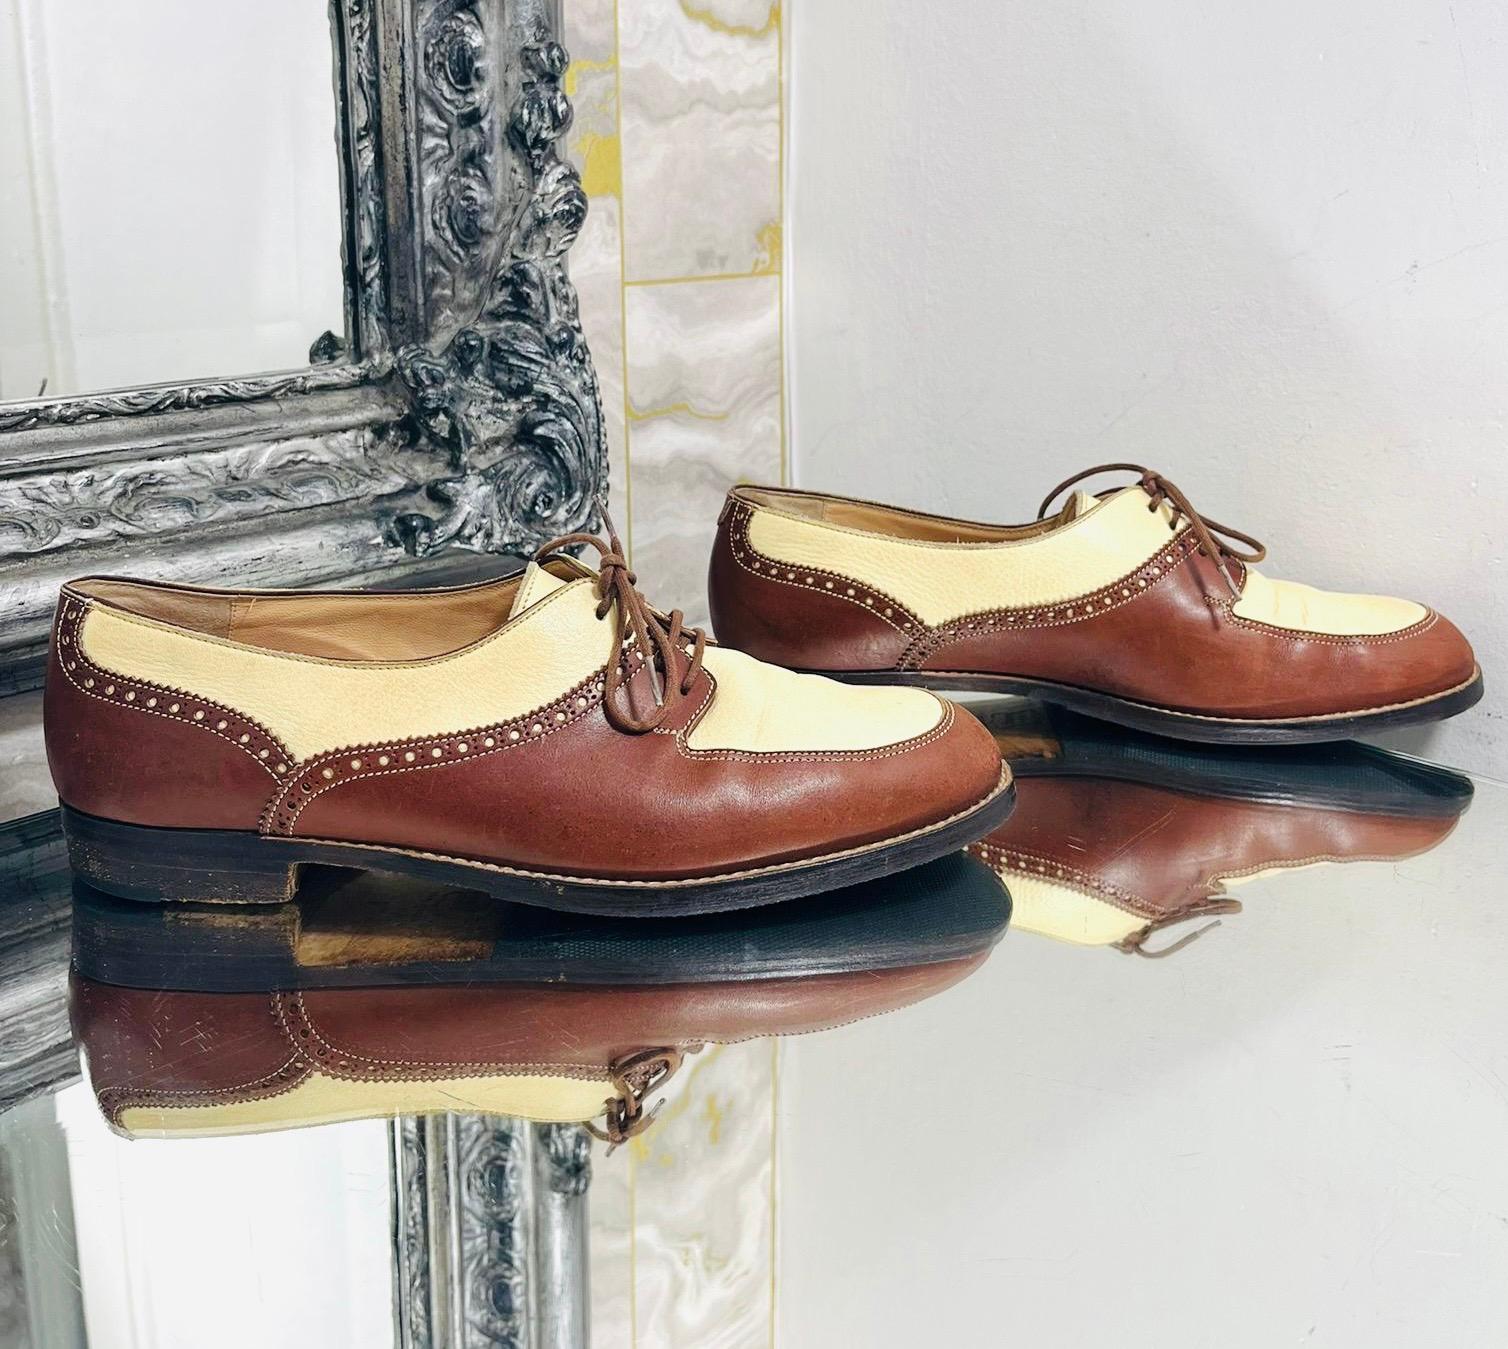 Manolo Blahnik Leather Brogues In Excellent Condition For Sale In London, GB